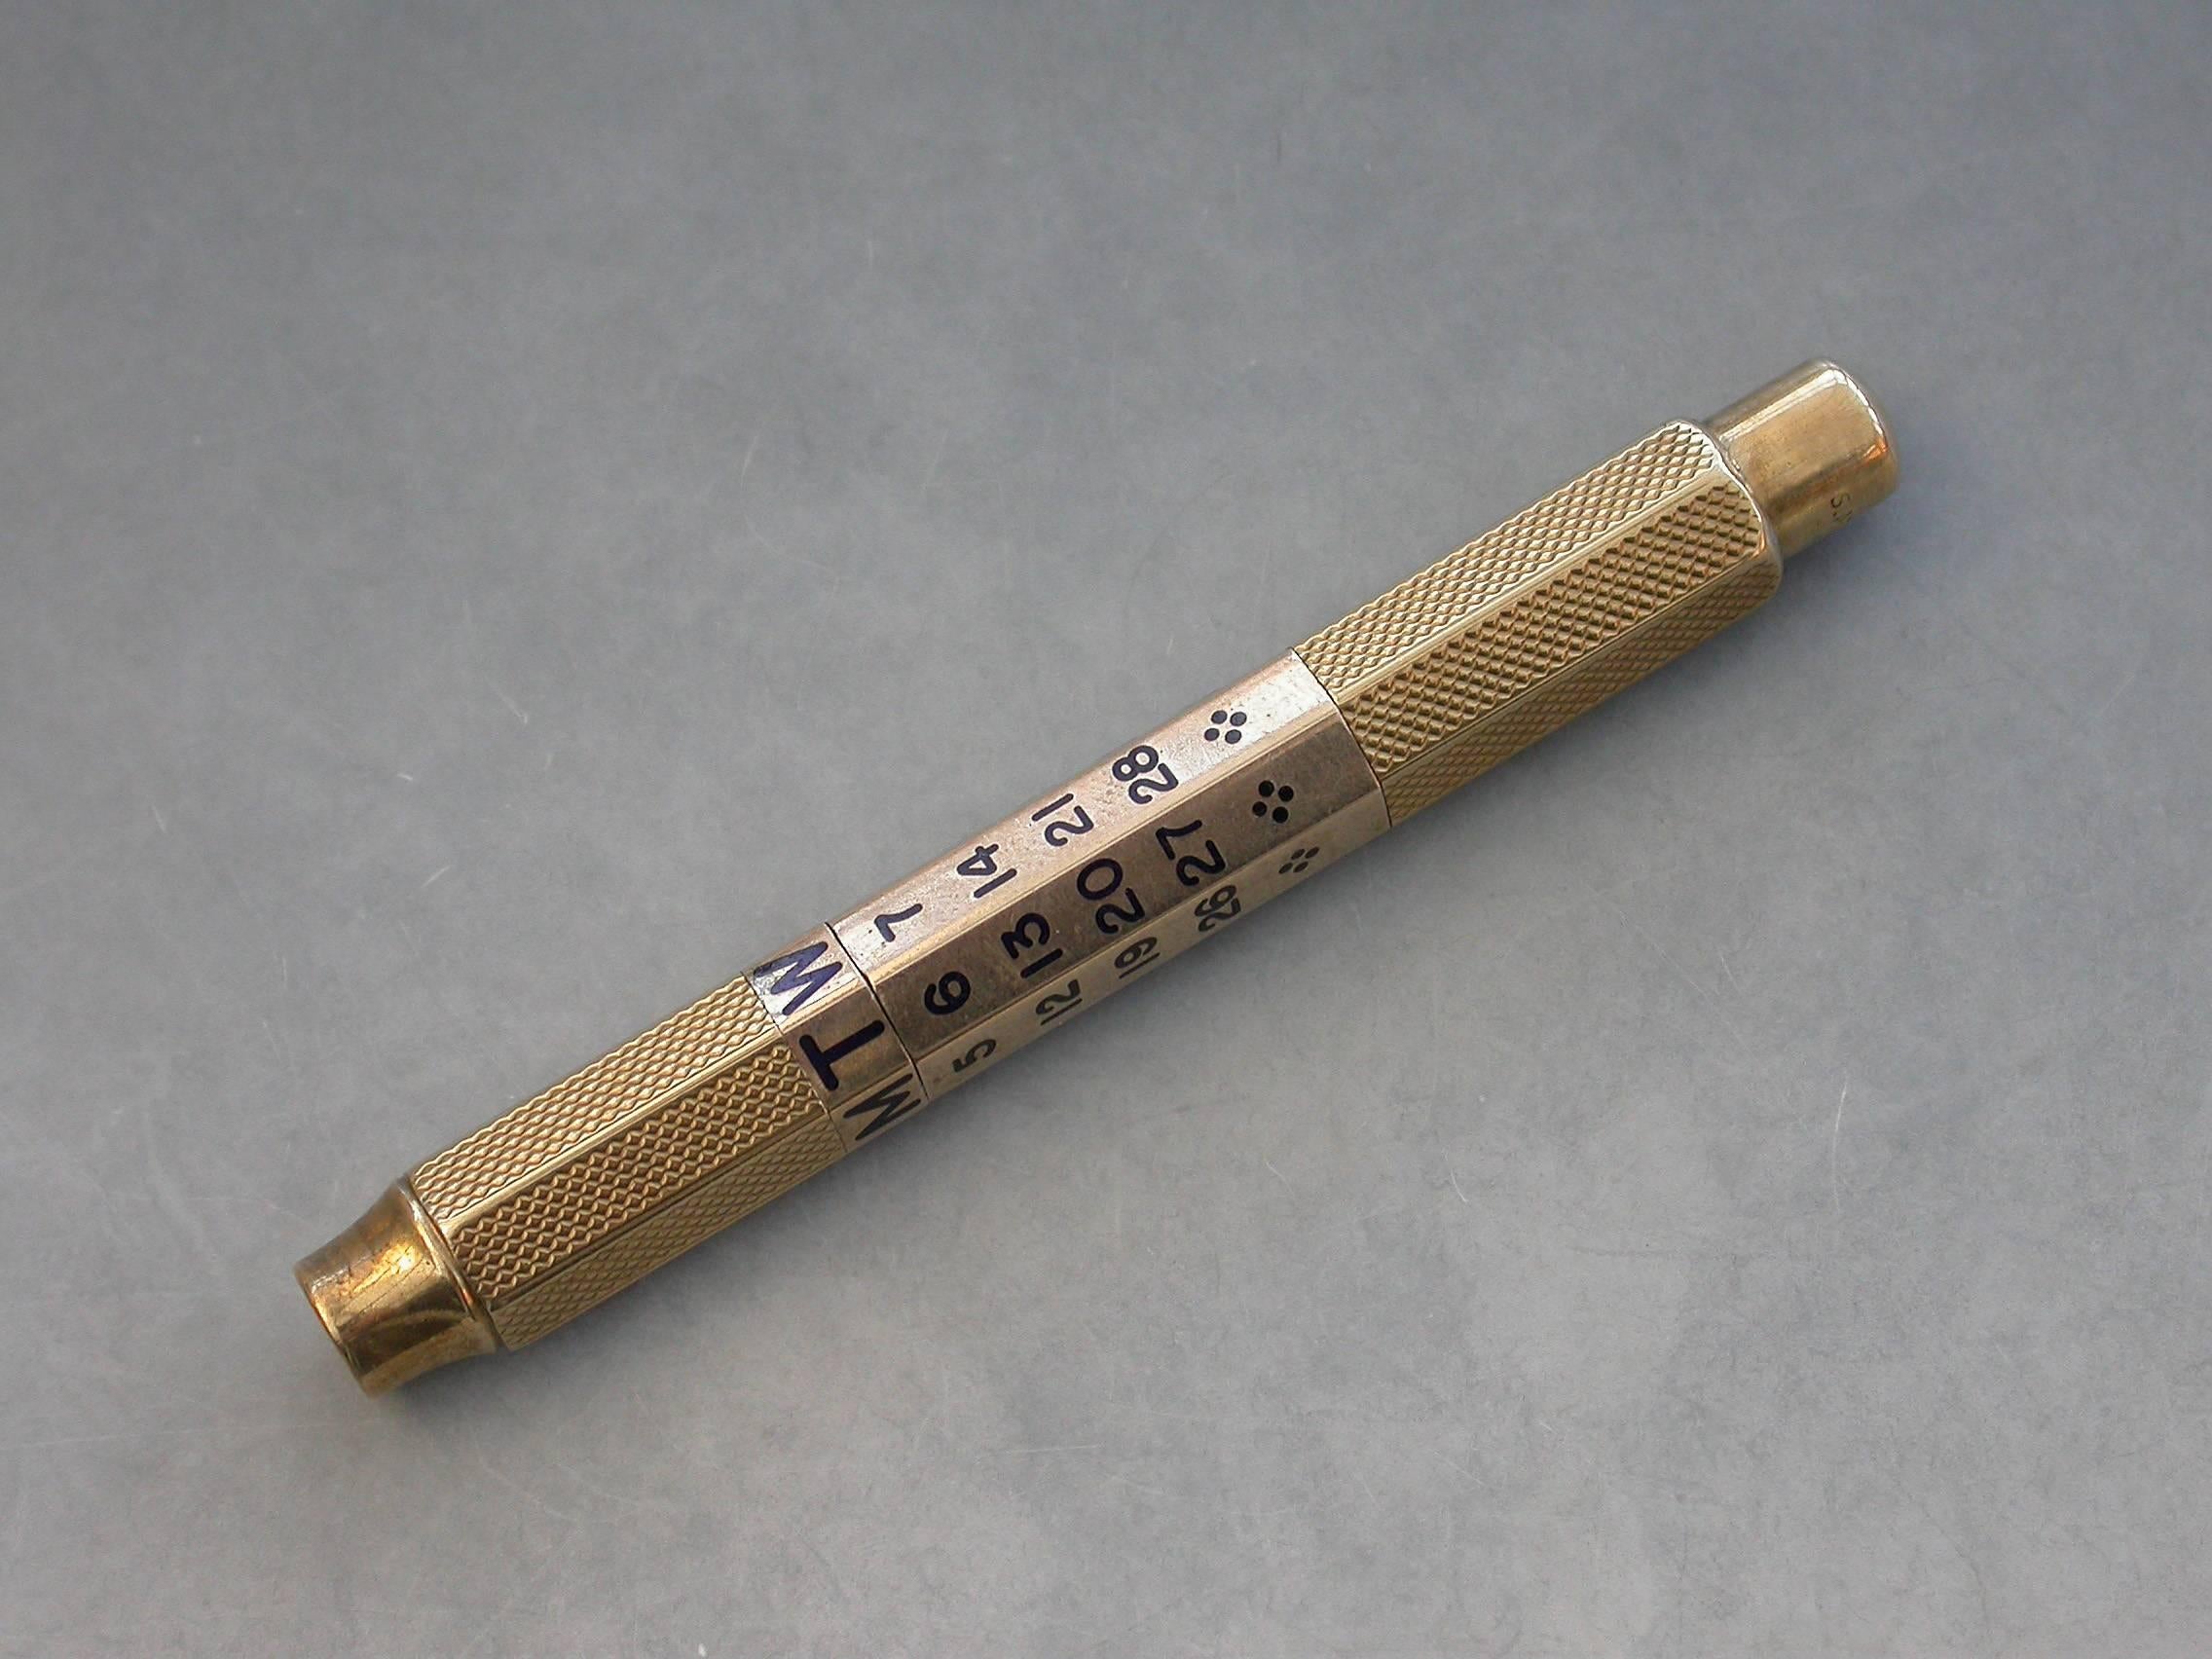 Early 20th Century 9-Carat Gravity Drop Perpetual Calendar Propelling Pencil In Good Condition For Sale In Sittingbourne, Kent